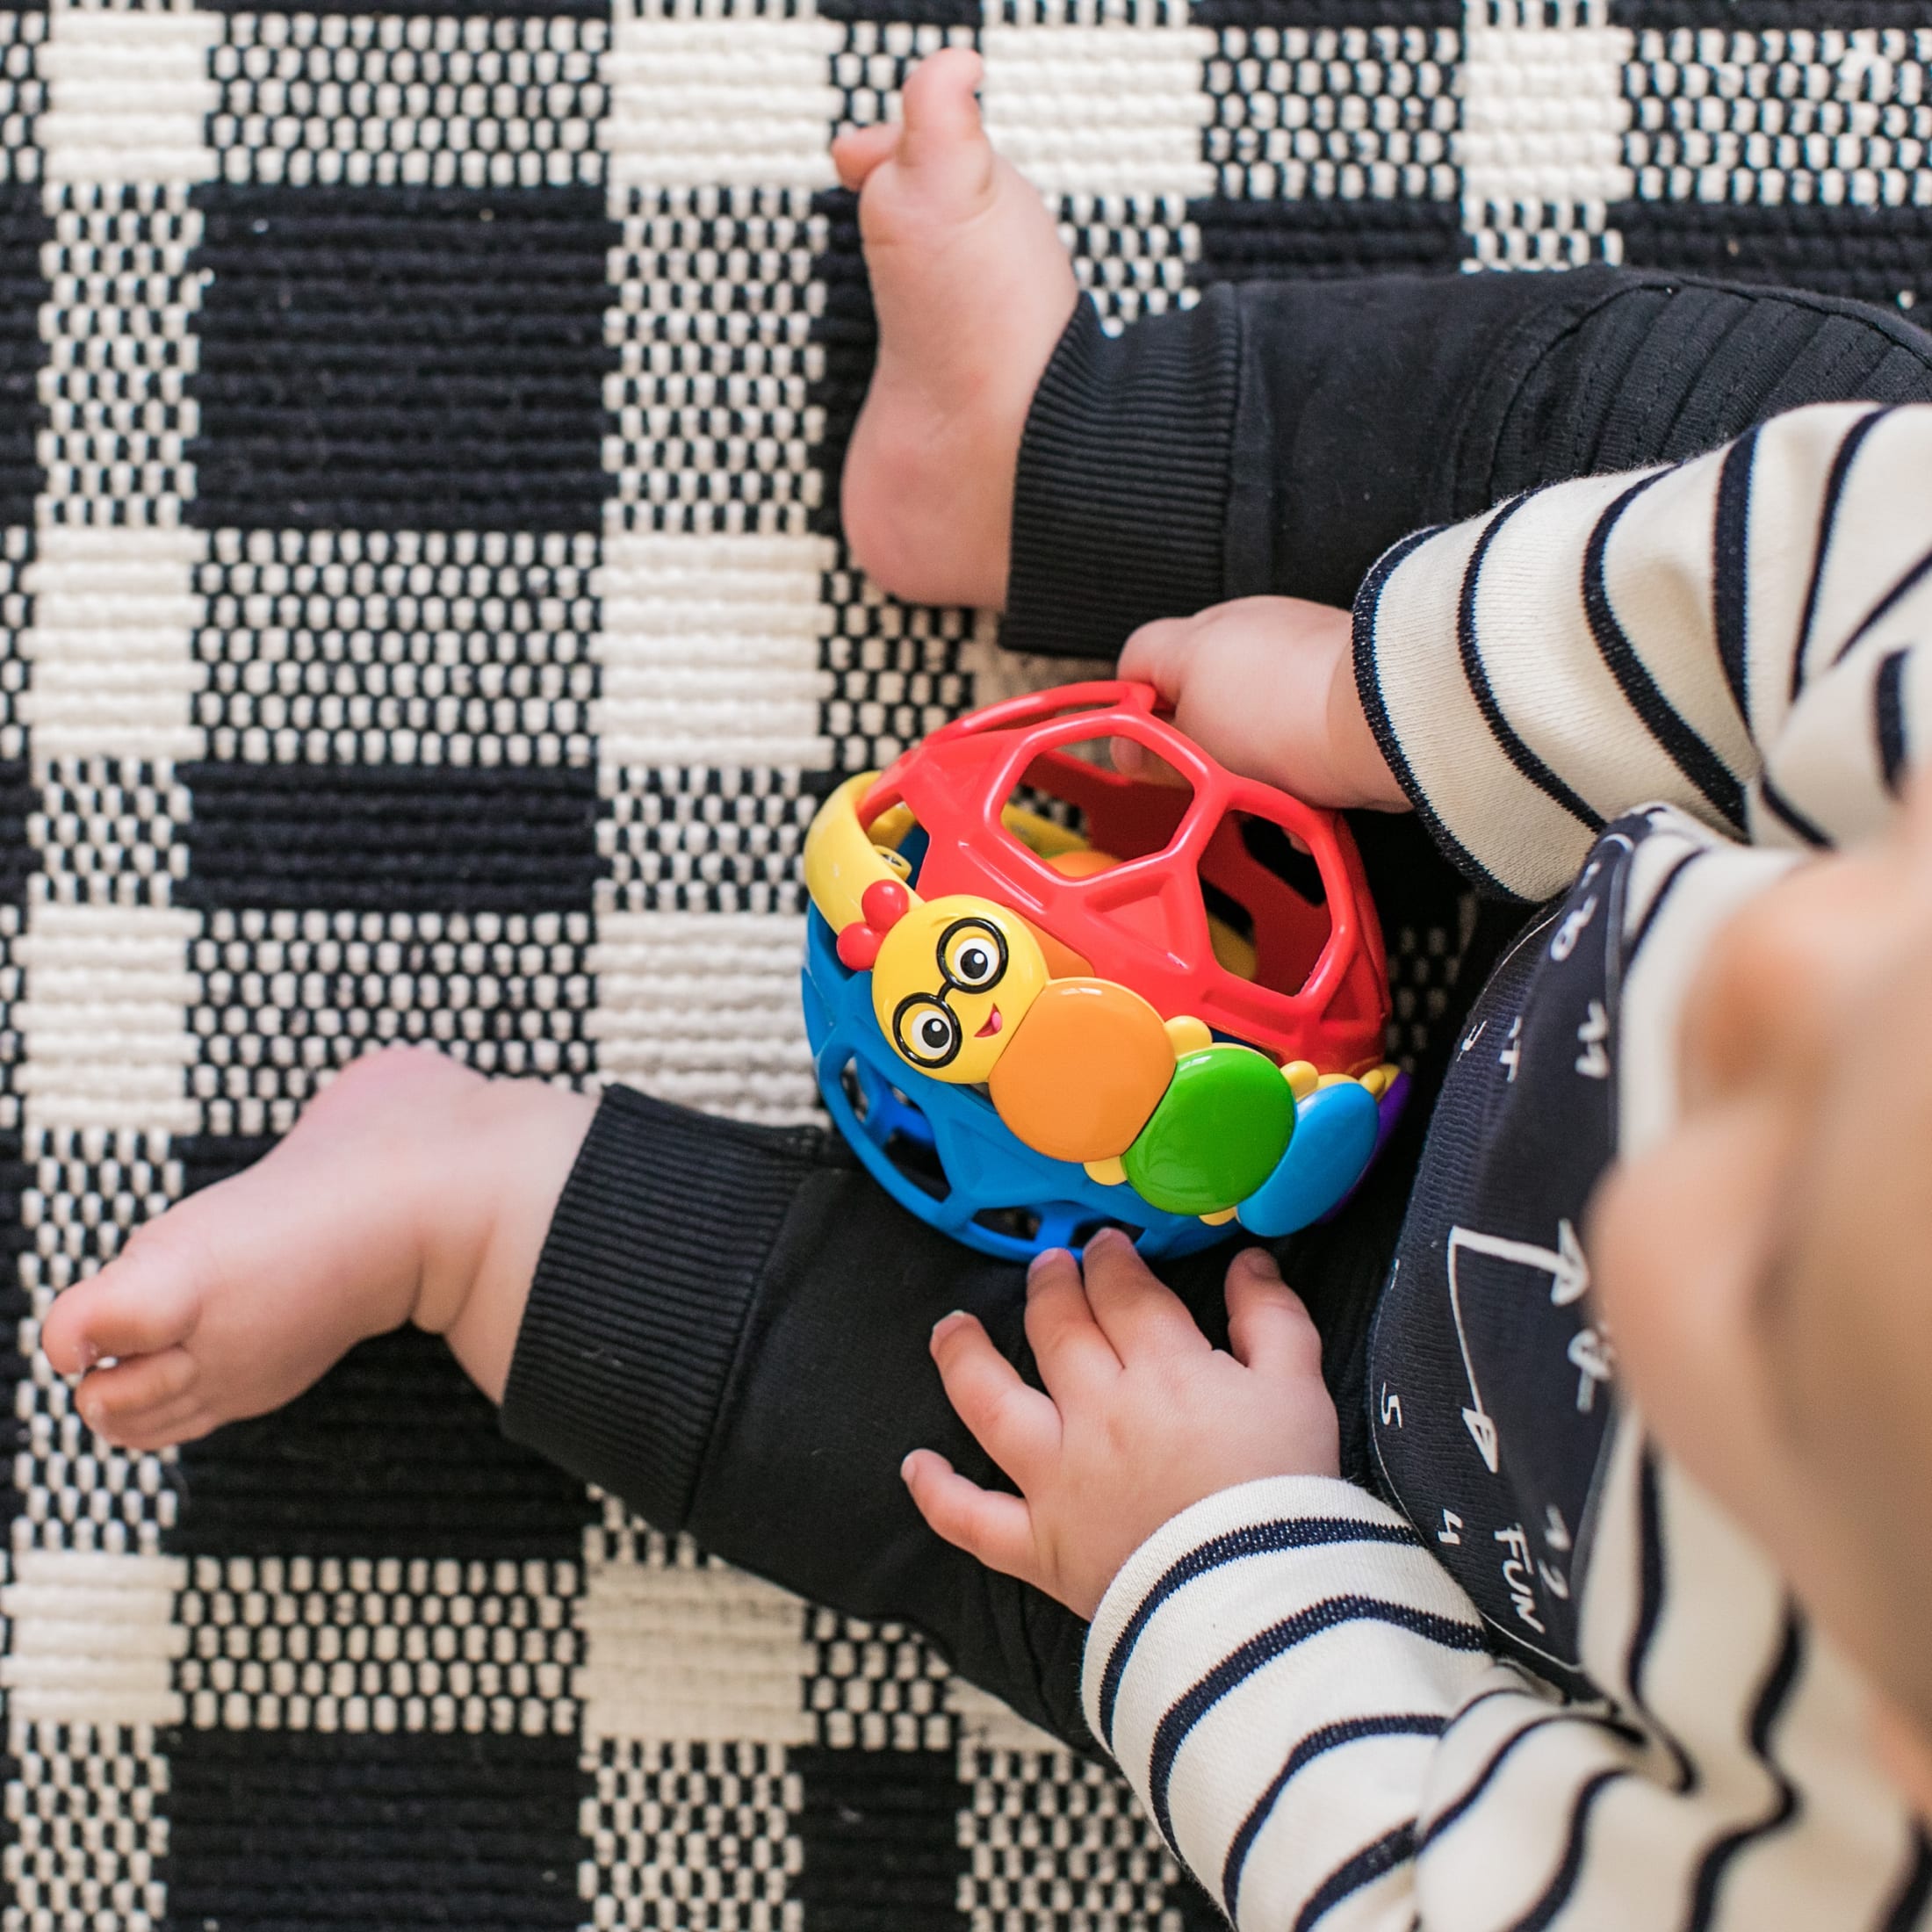 Baby Einstein Bendy Ball Easy Grasp Oball Rattle BPA-free Toy, Ages 3 Months+ - image 5 of 11